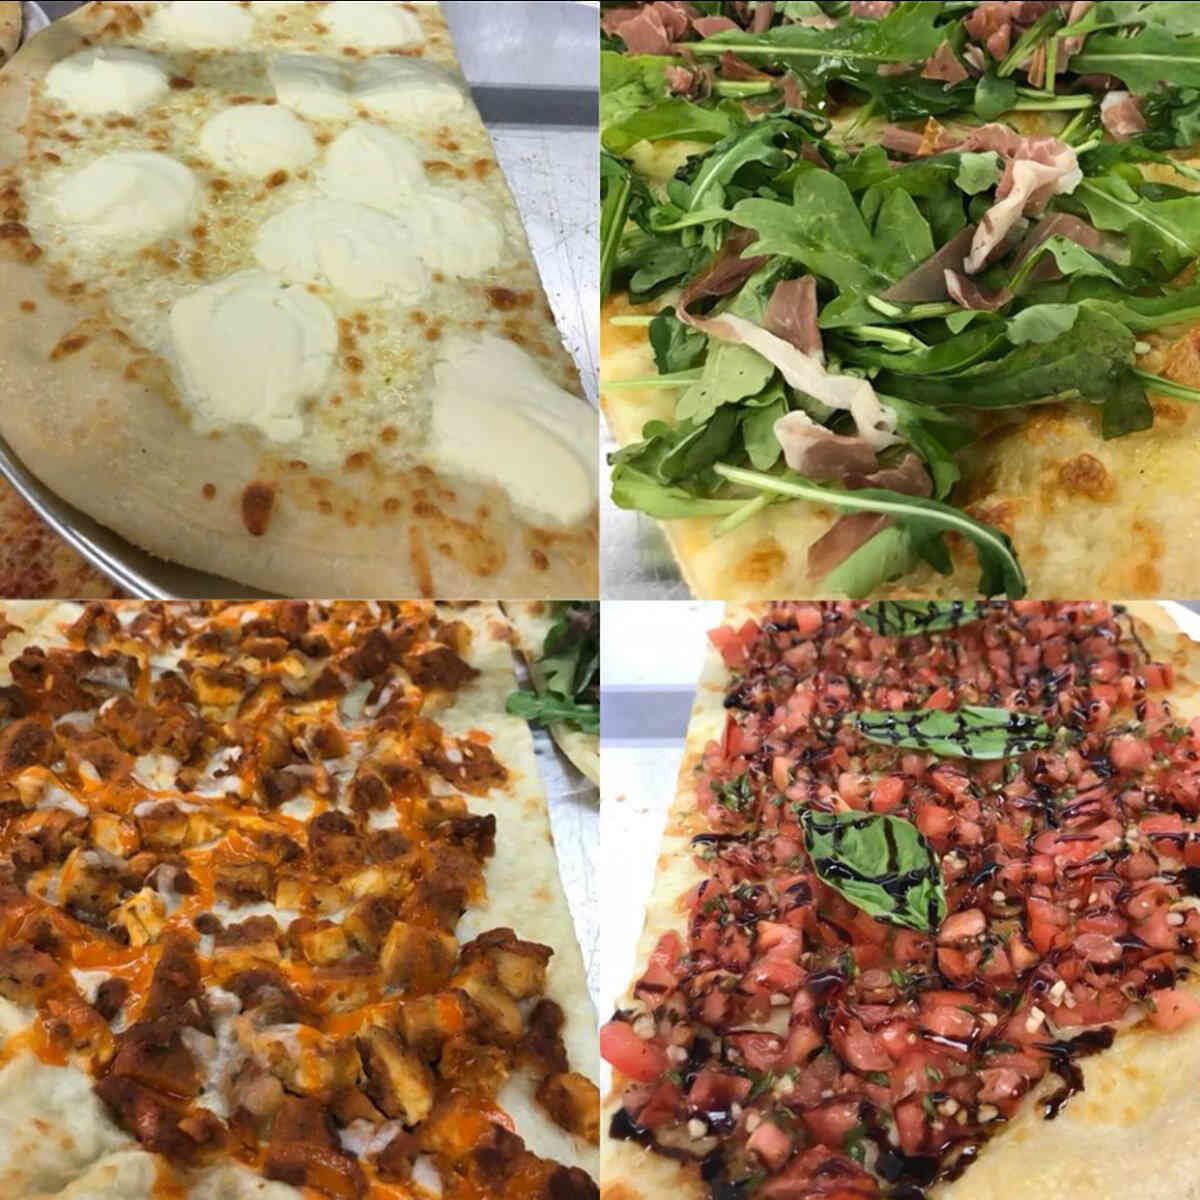 Supermarket pizza concept weds pies with fresh toppings|Supermarket pizza concept weds pies with fresh toppings